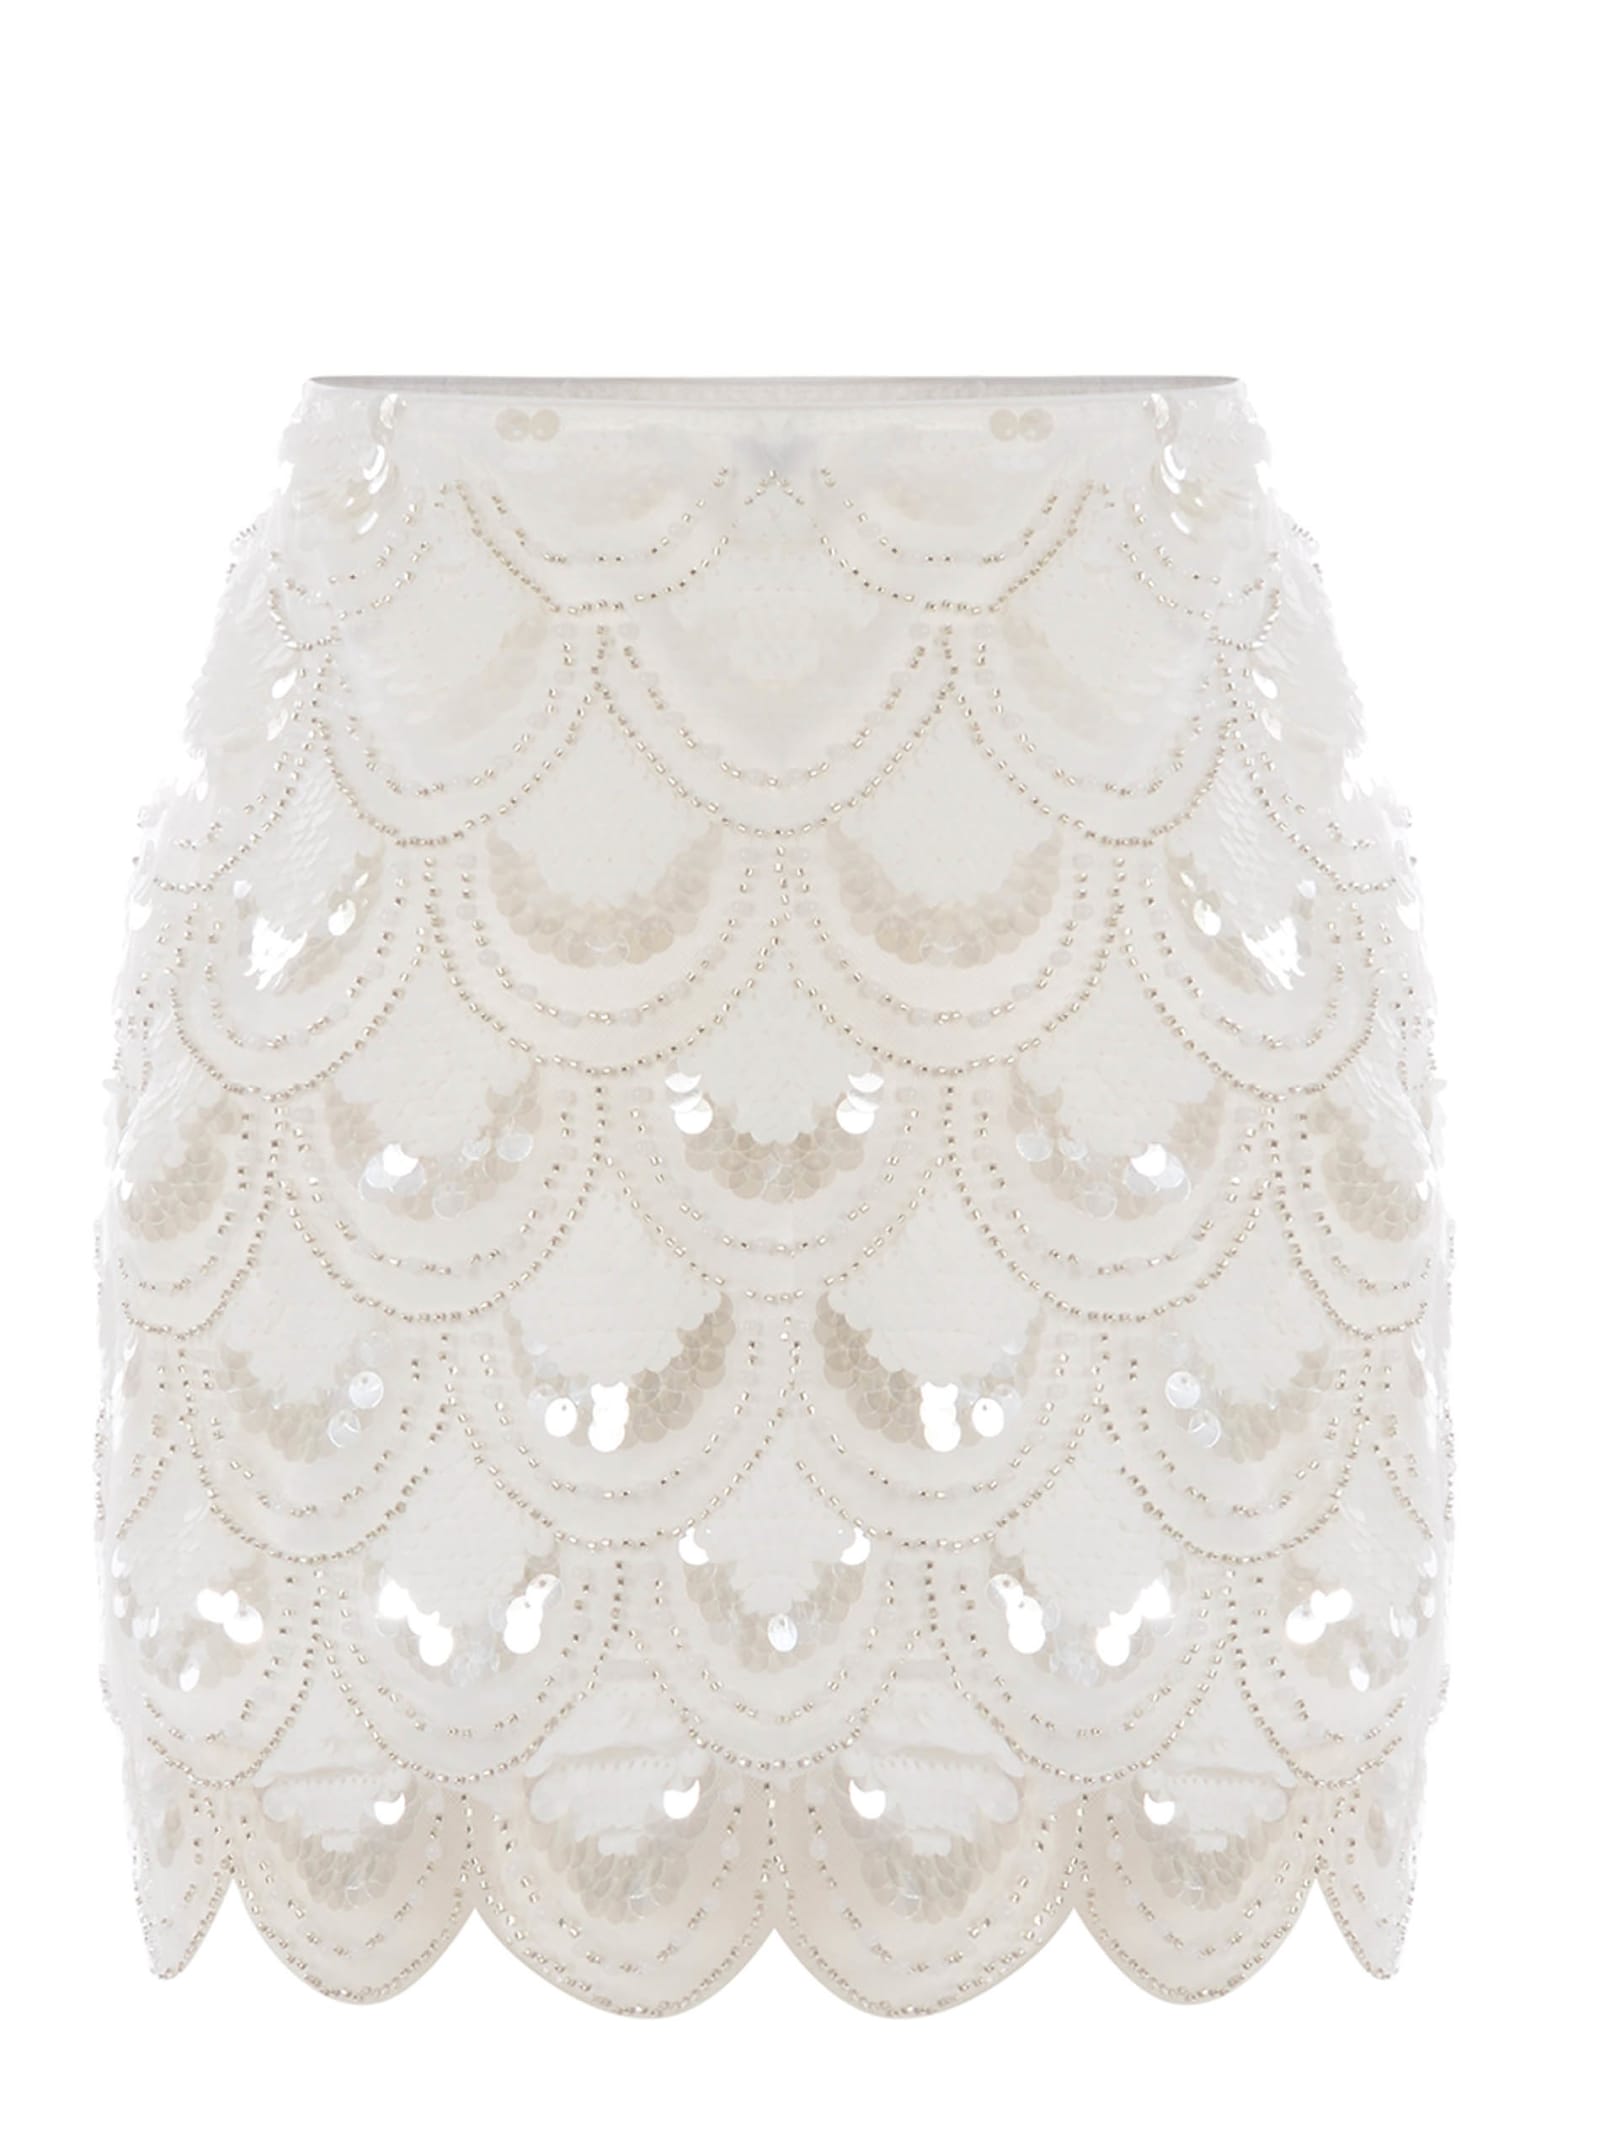 Shop Rotate Birger Christensen Skirt Rotate Made With Sequins In Bianco